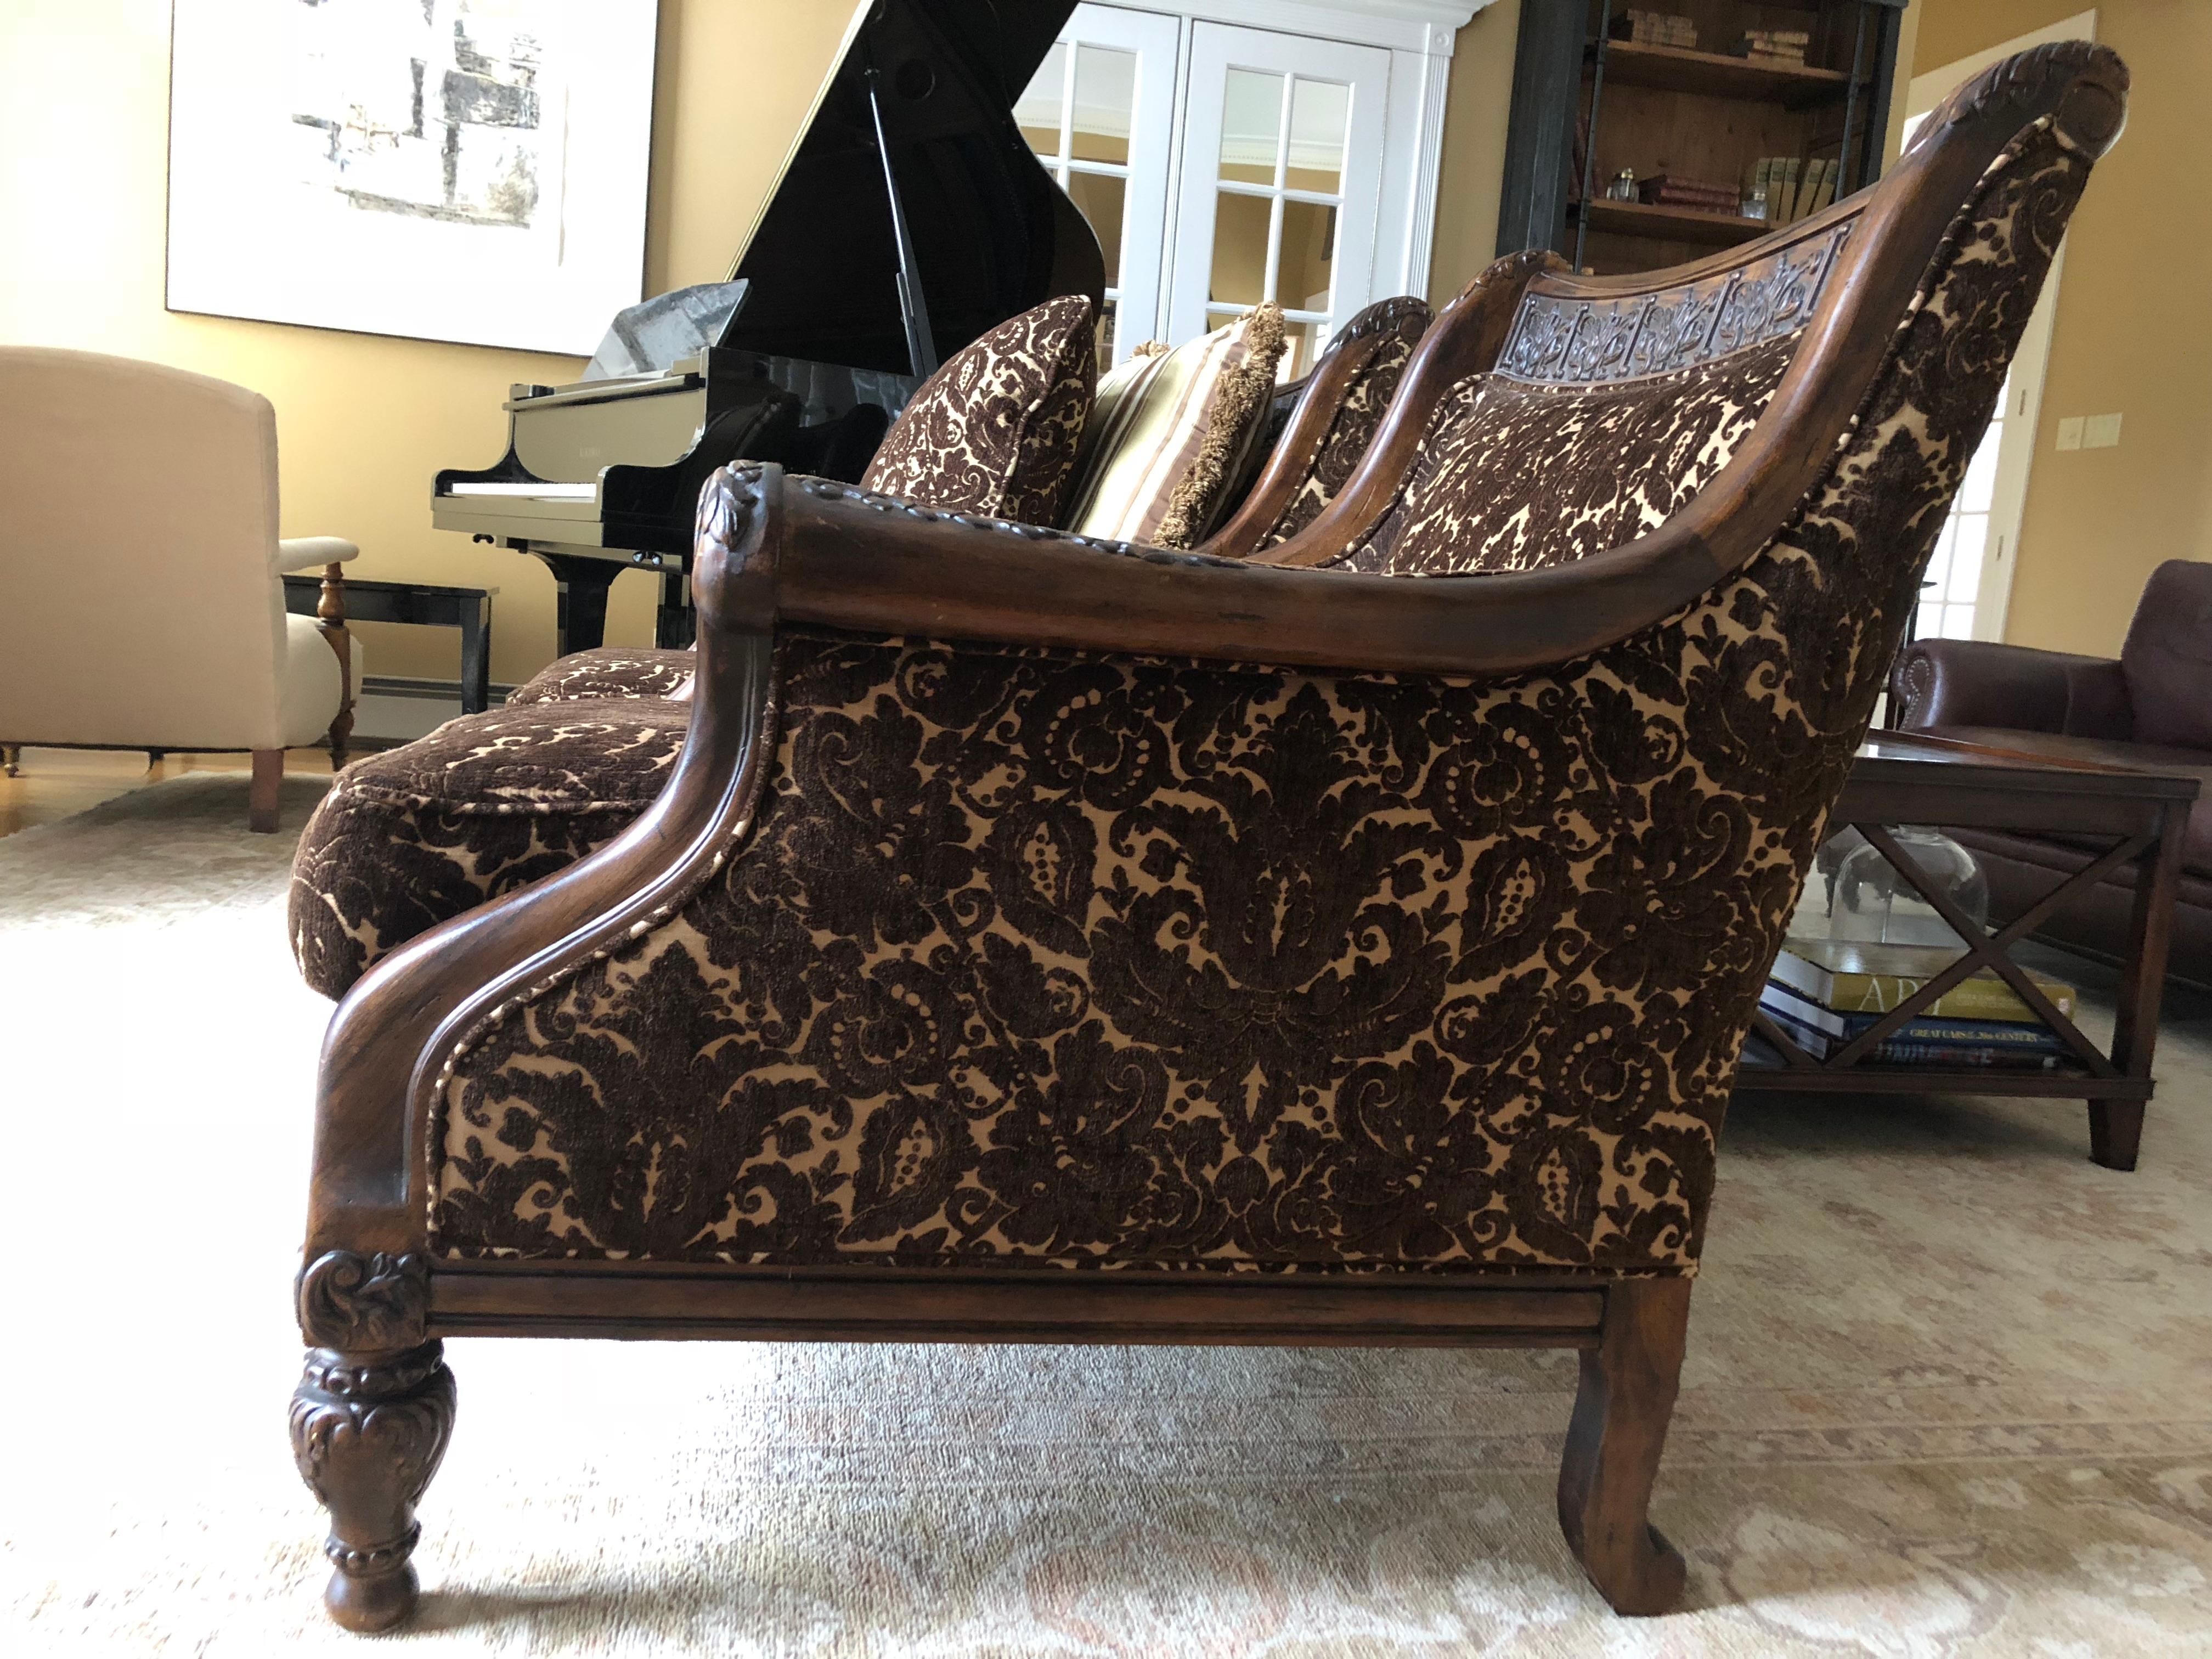 Gorgeous pair of classic carved walnut and richly upholstered Walsh lounge chairs by Century Furniture. The handsome carving appears on arm rests, back header, and feet, and the upholstery is a plush raised velour chocolate brown colored patterned